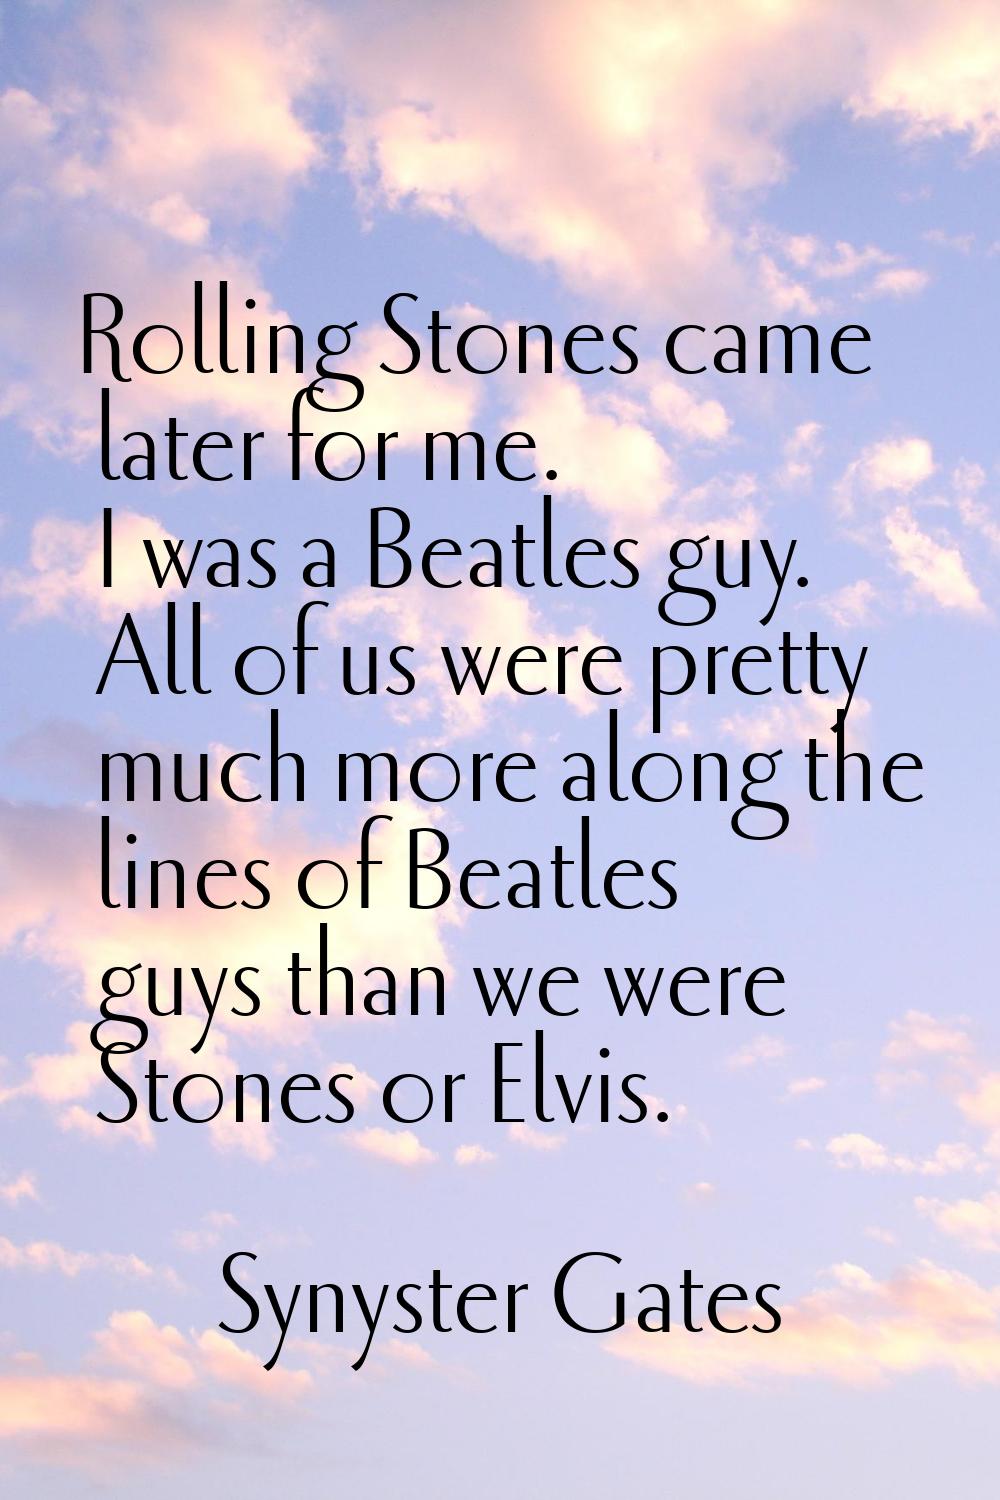 Rolling Stones came later for me. I was a Beatles guy. All of us were pretty much more along the li